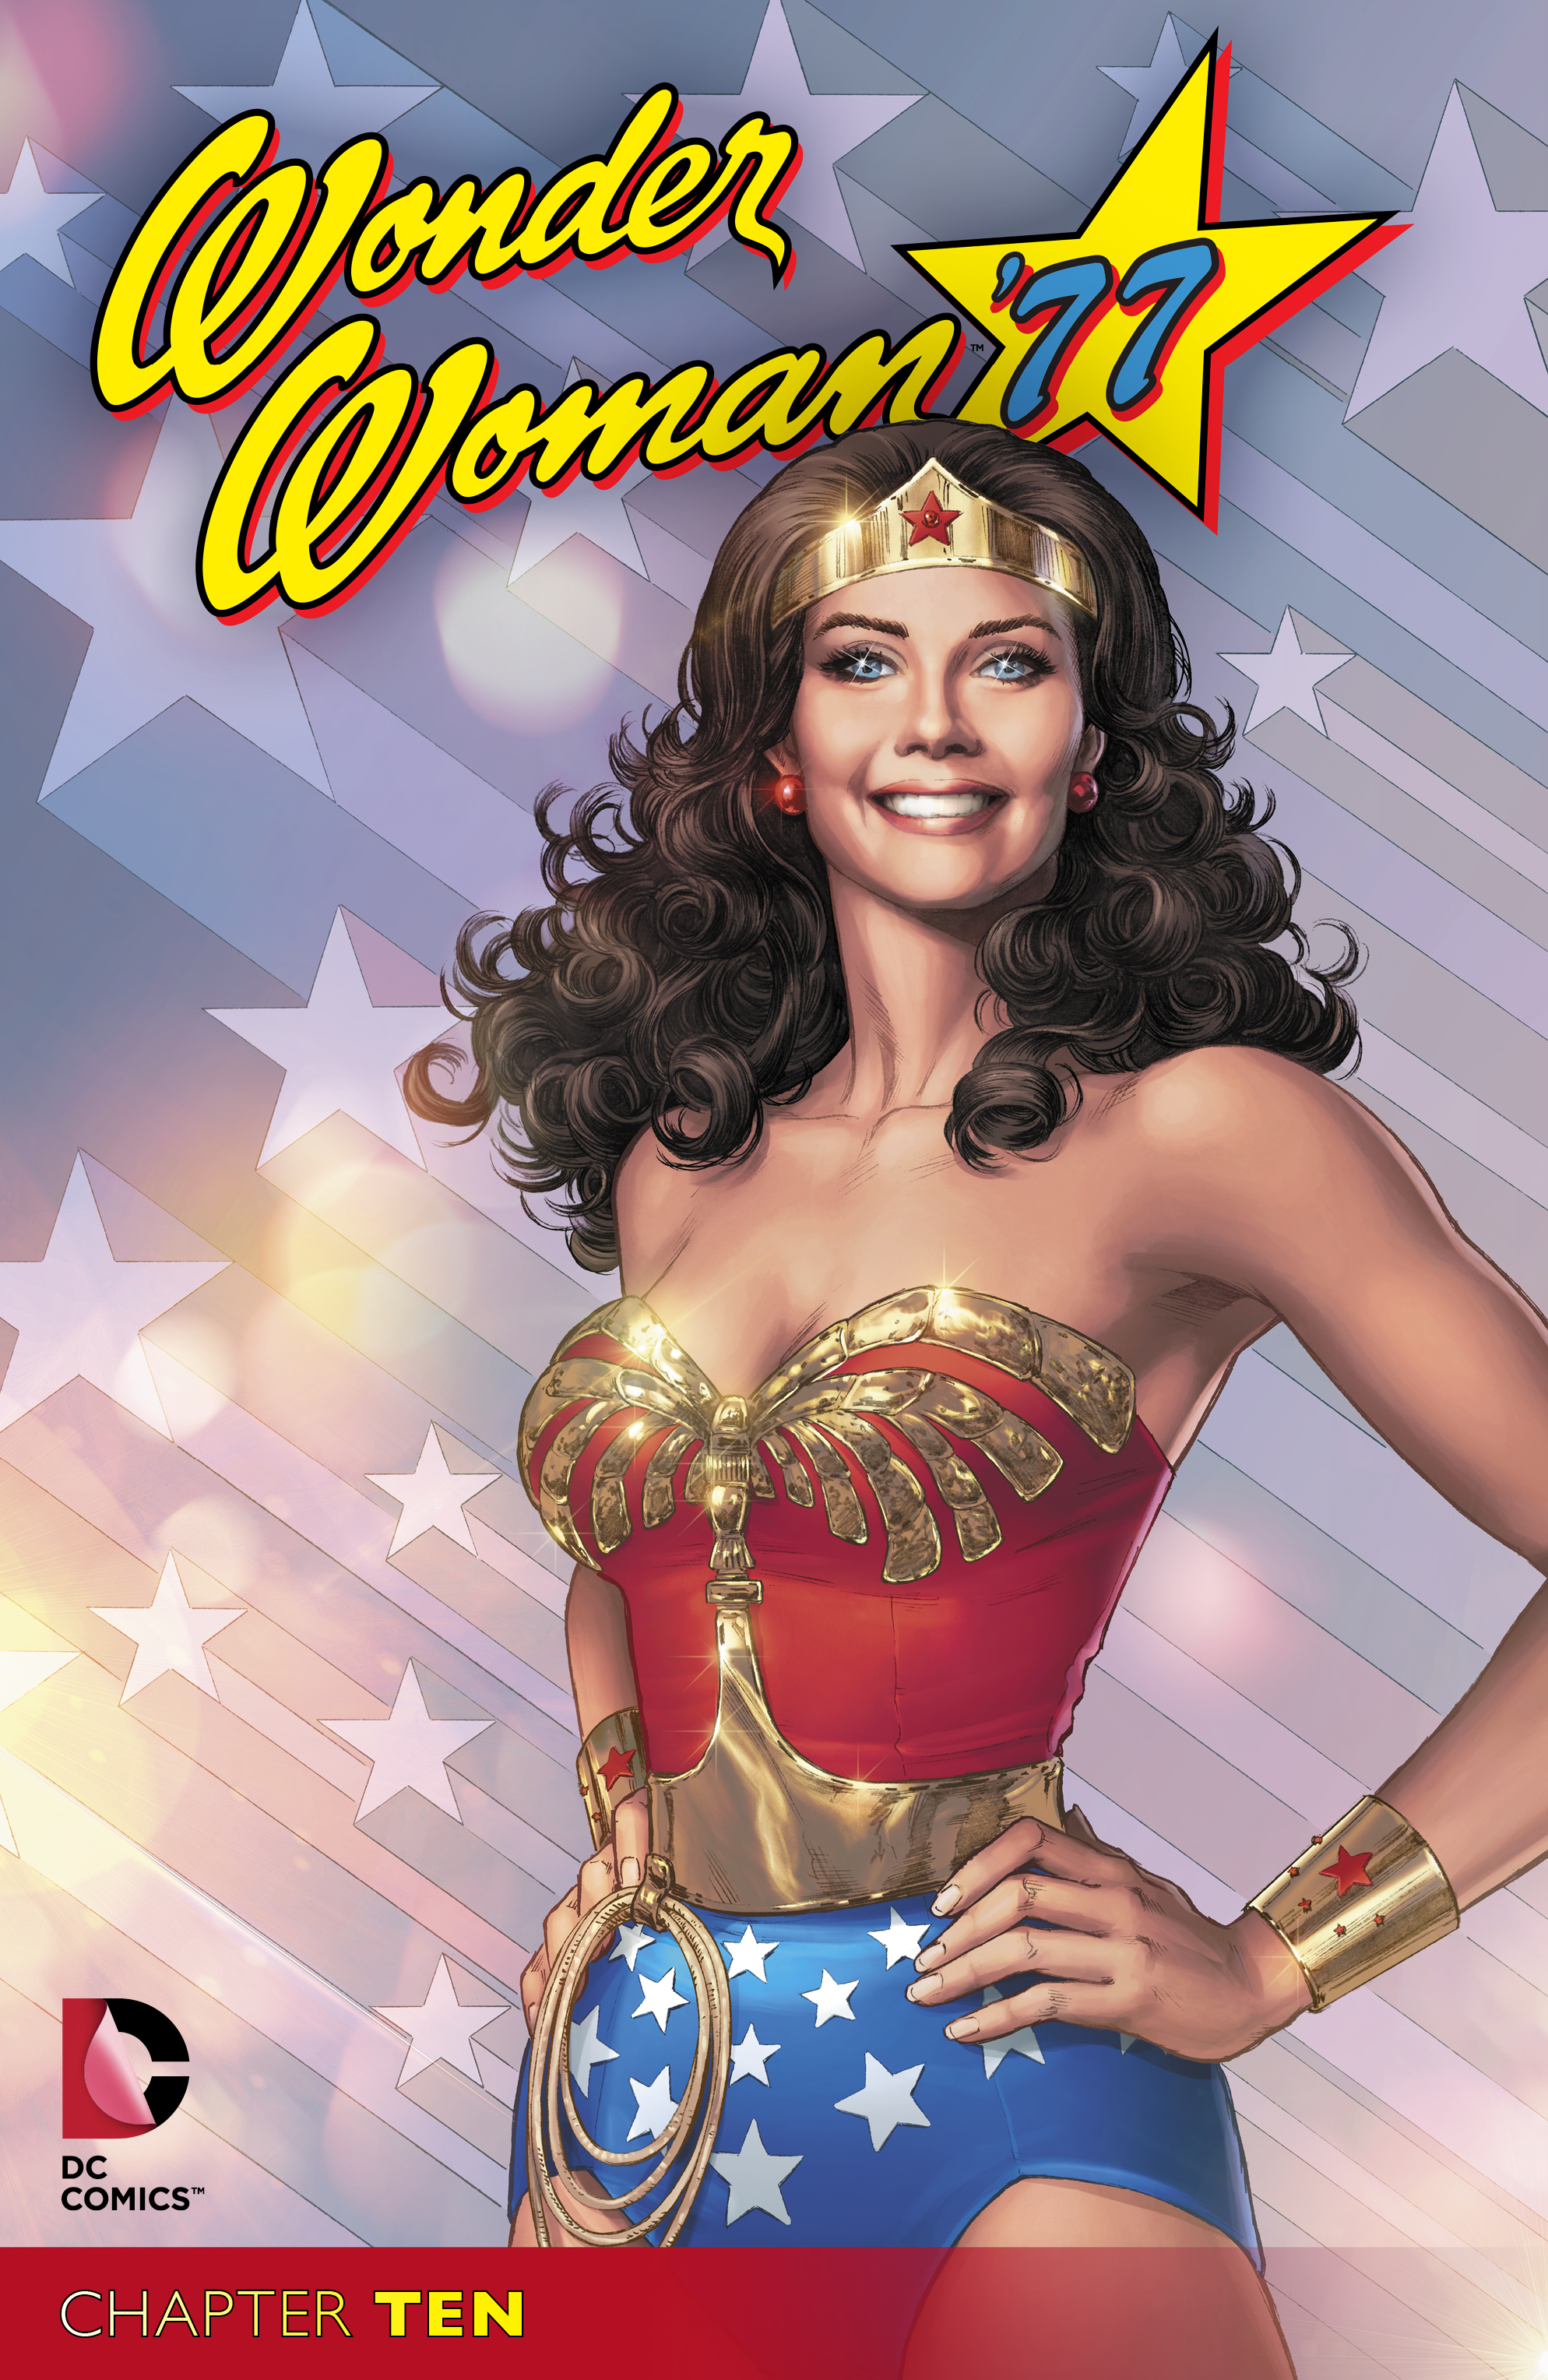 Wonder Woman '77 #10 preview images